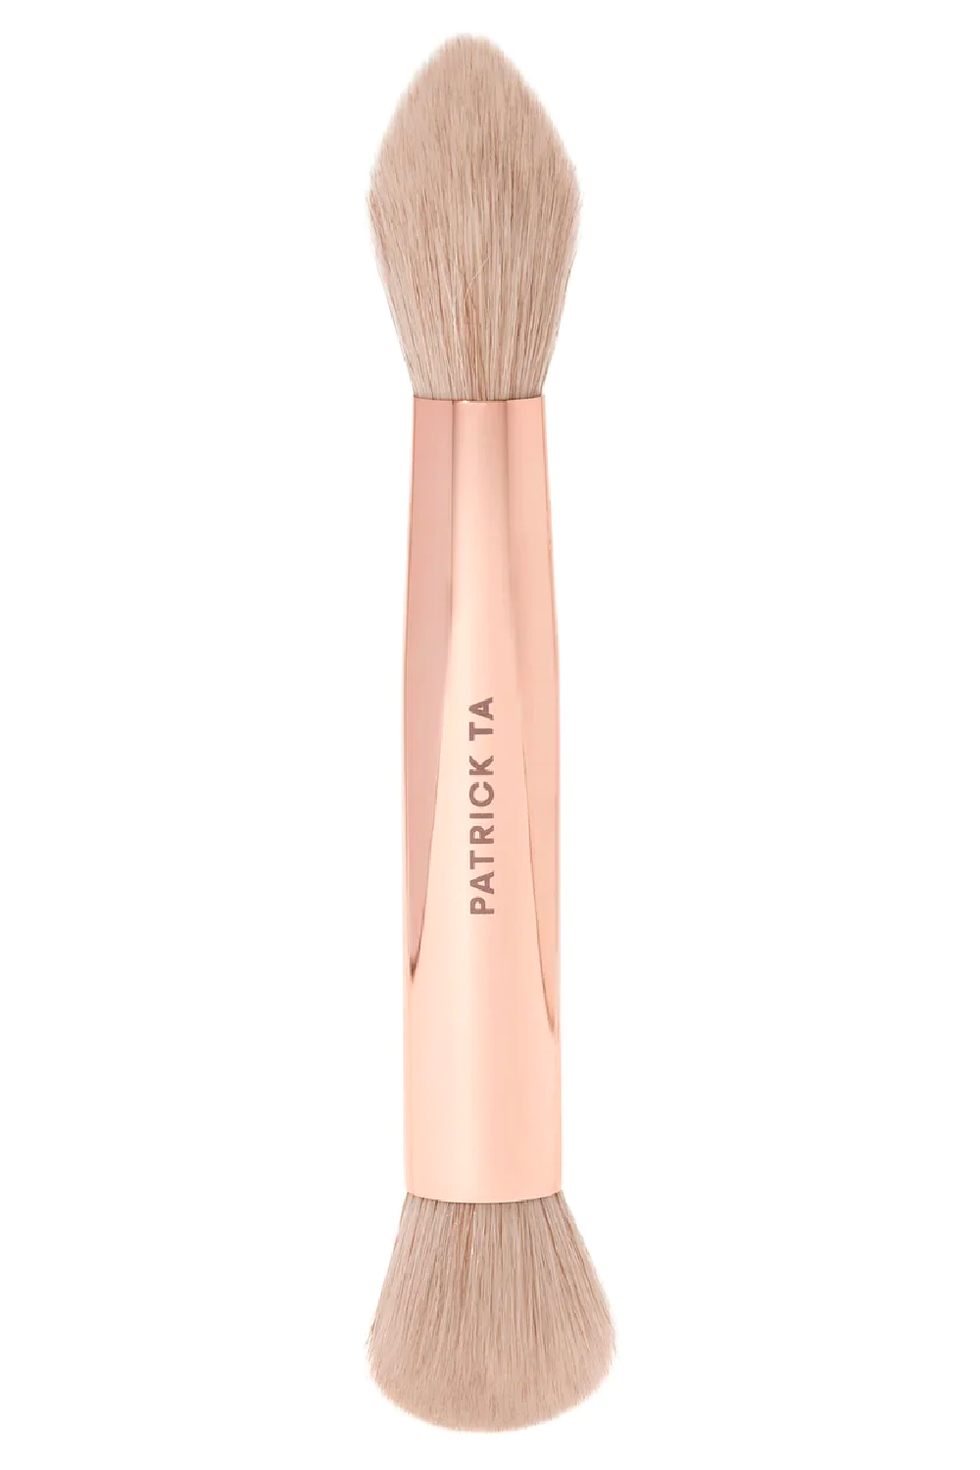 The 14 best foundation brushes of 2023, per makeup artists